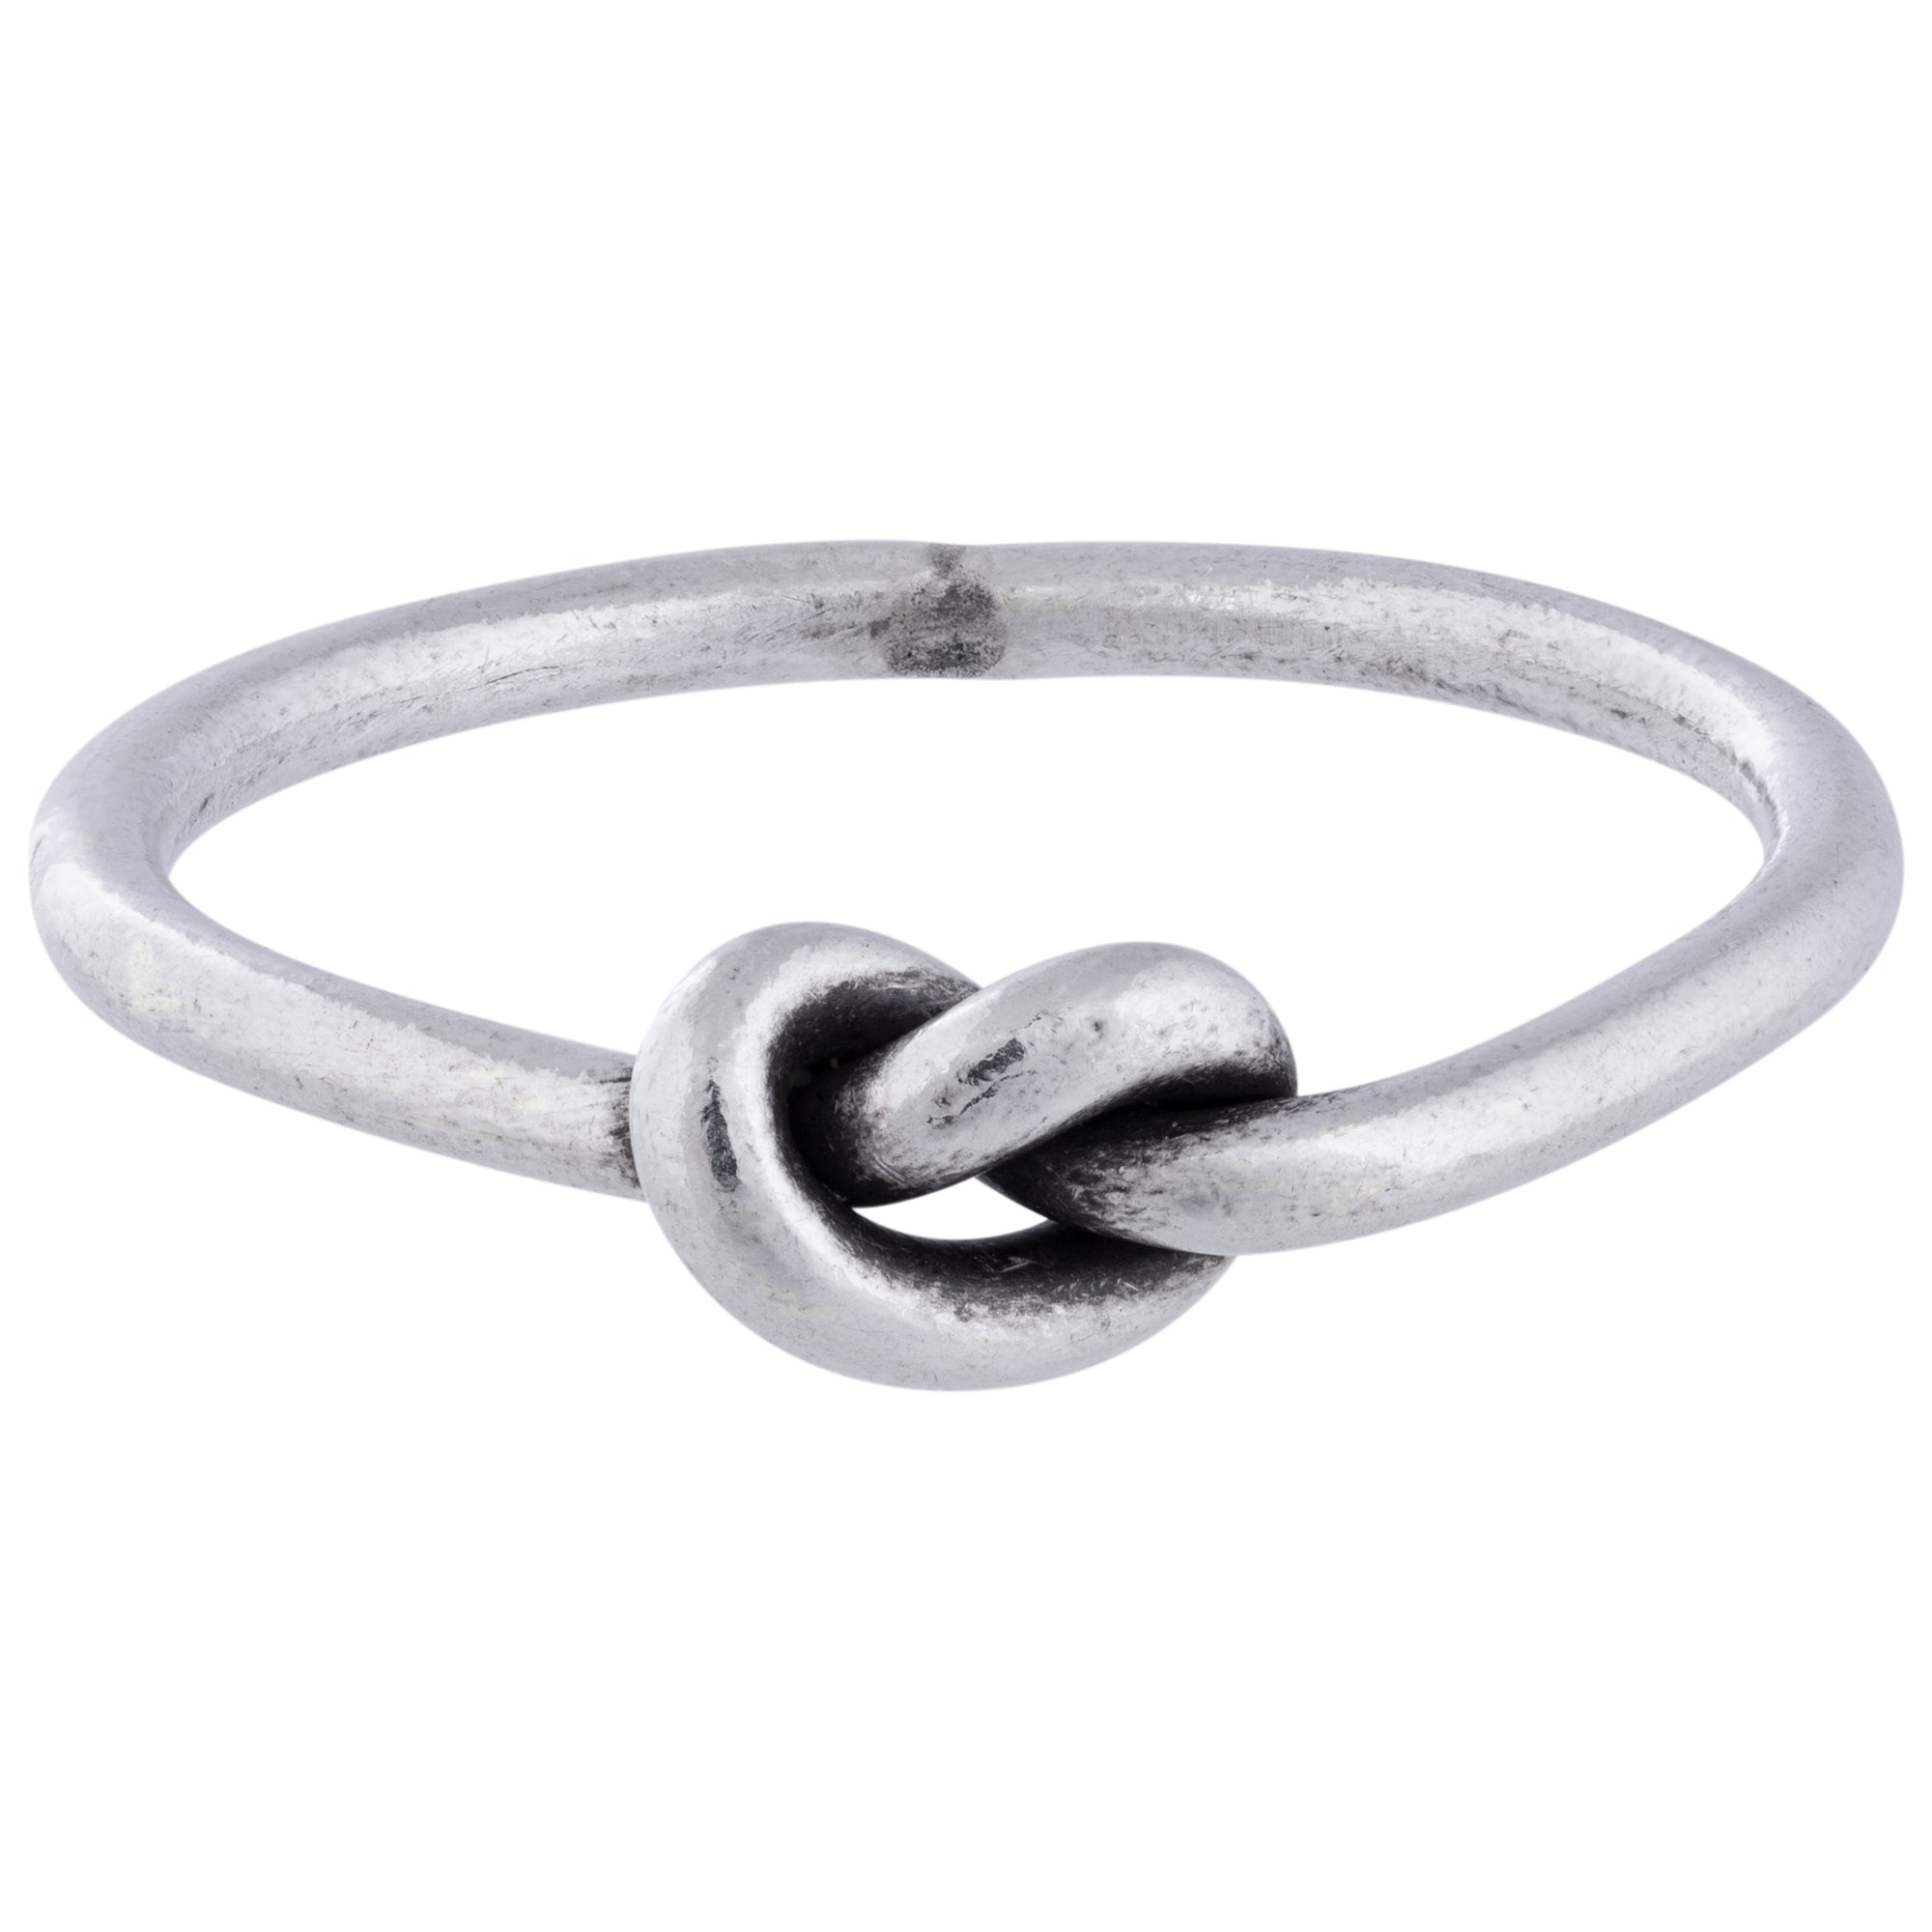 Tiny Knot Sterling Silver Ring - Size 9